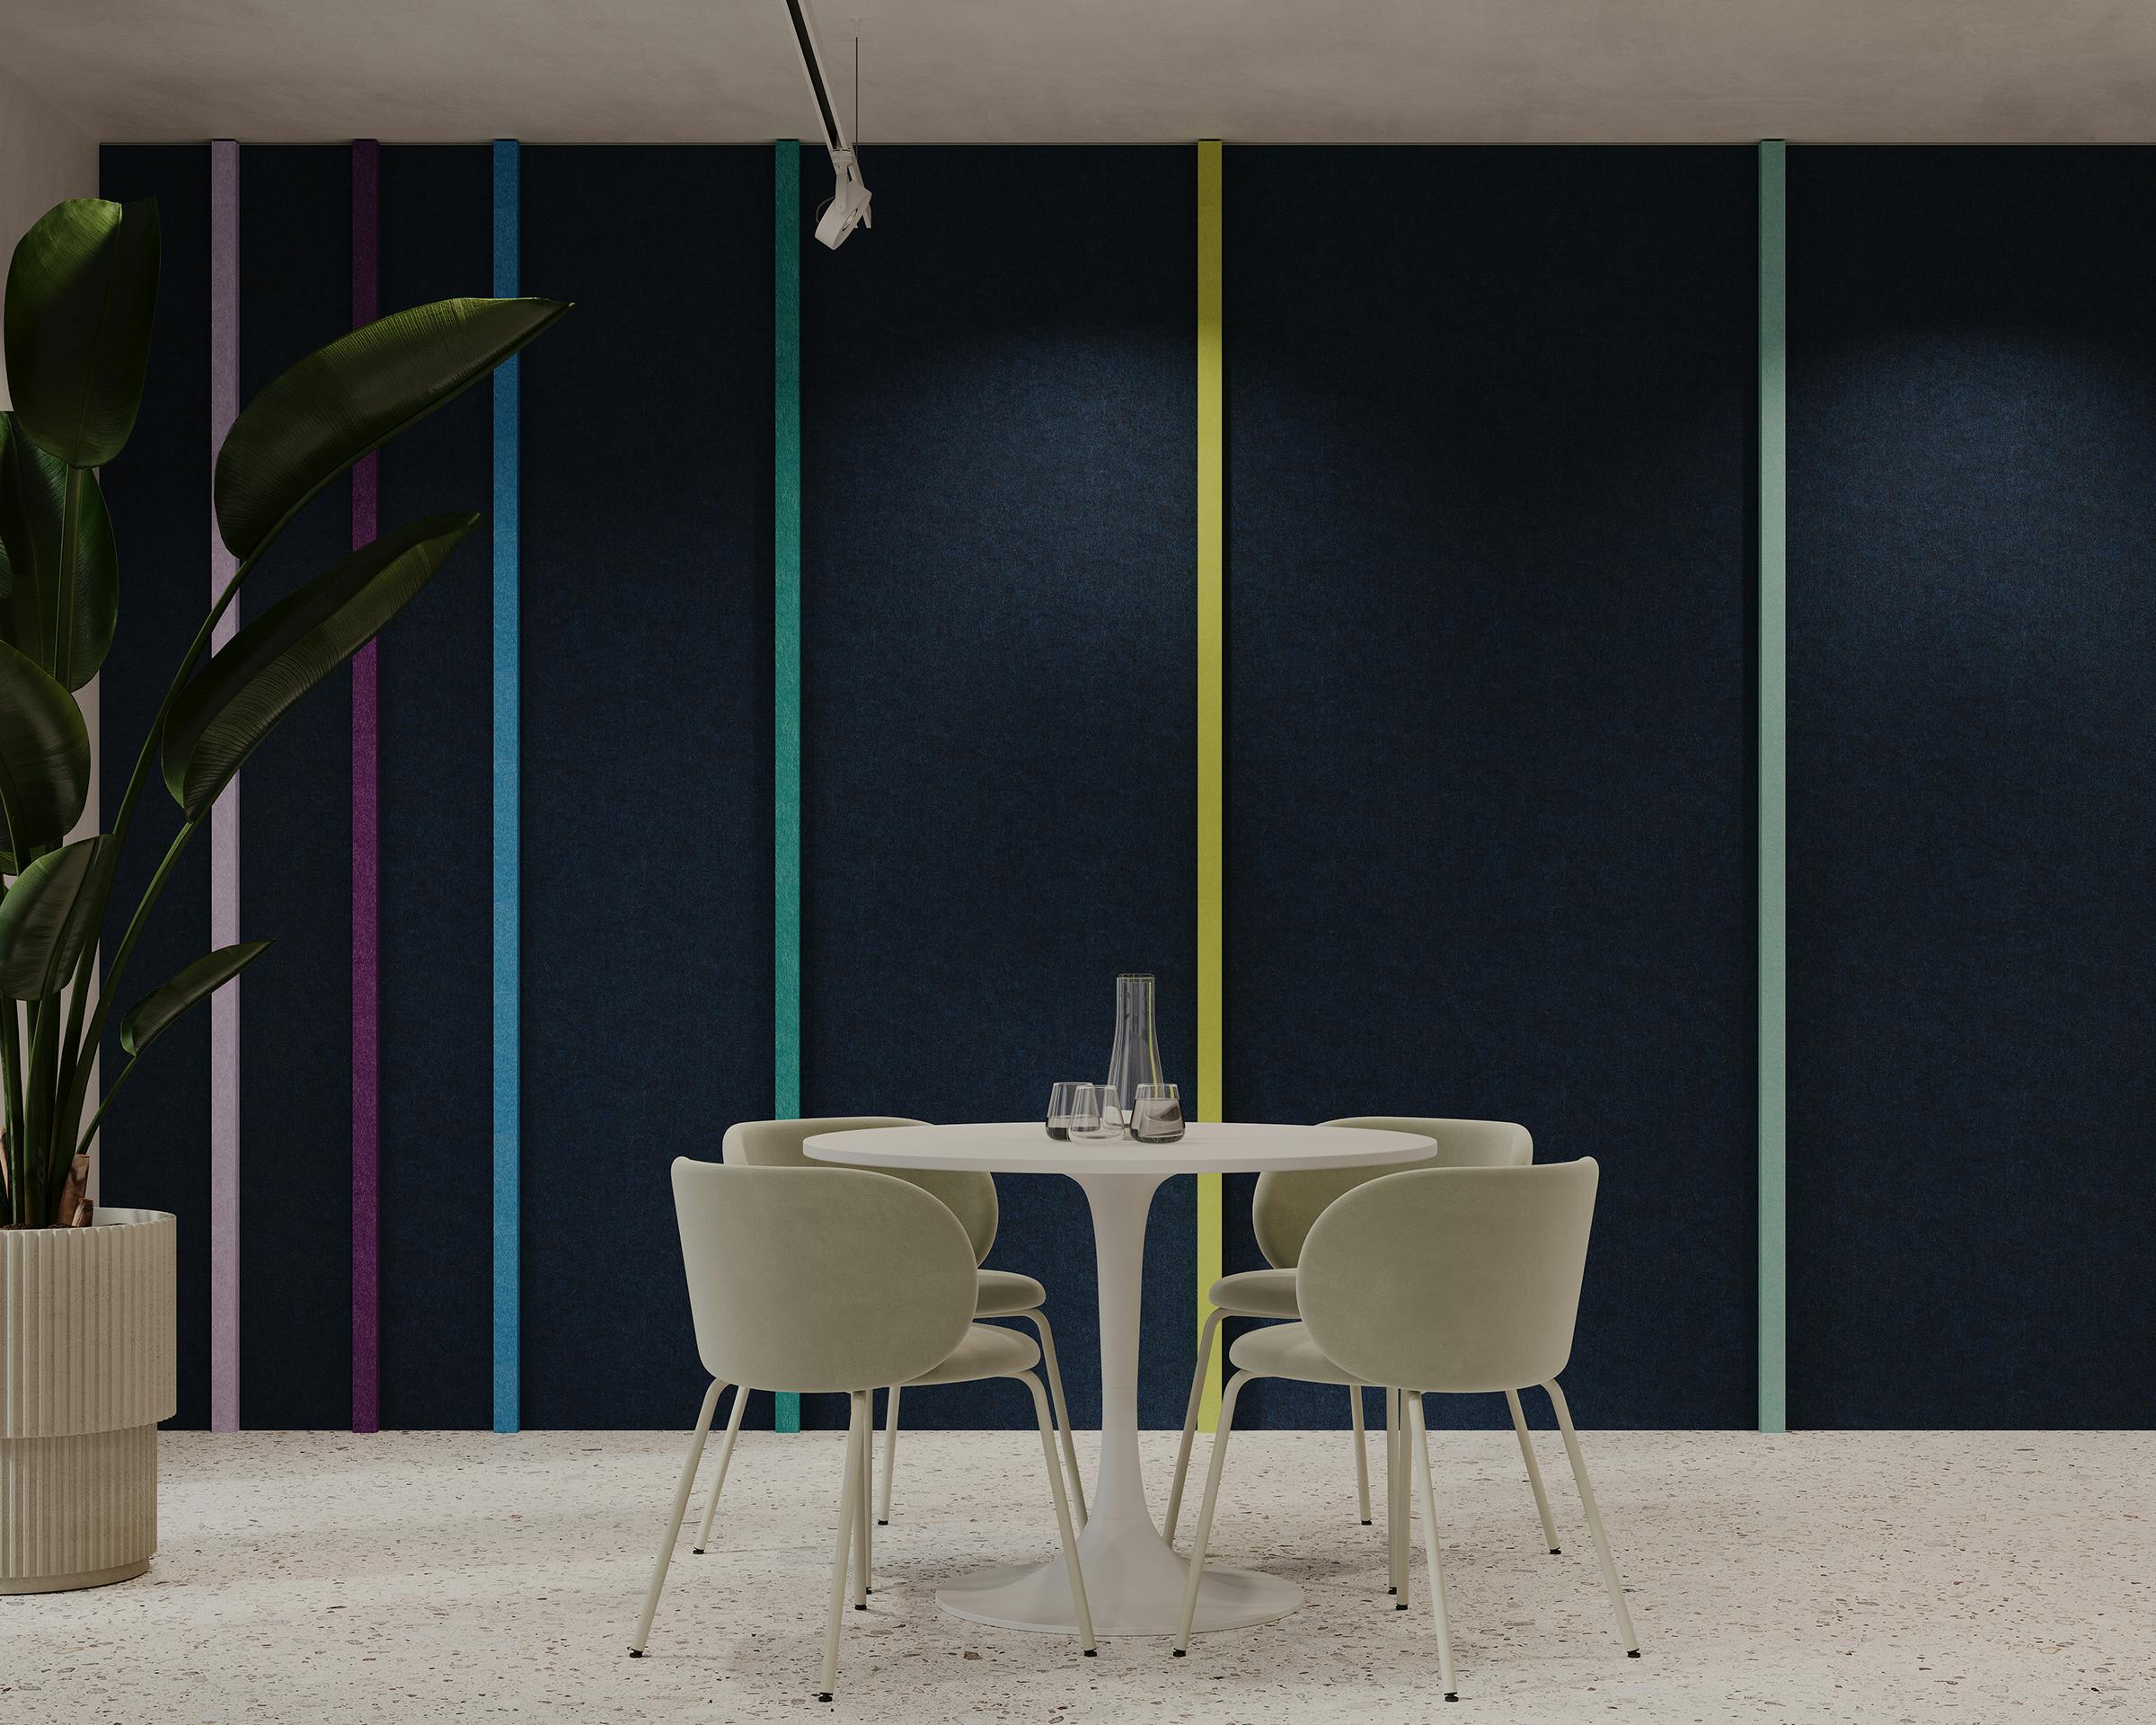 A modern, minimalist interior features a small white round table with four light green chairs. The backdrop is a dark blue acoustic felt wall accented with vertical, colorful stripes that resemble finely stitched seams. A potted plant with large green leaves stands on the left, adding a touch of nature.